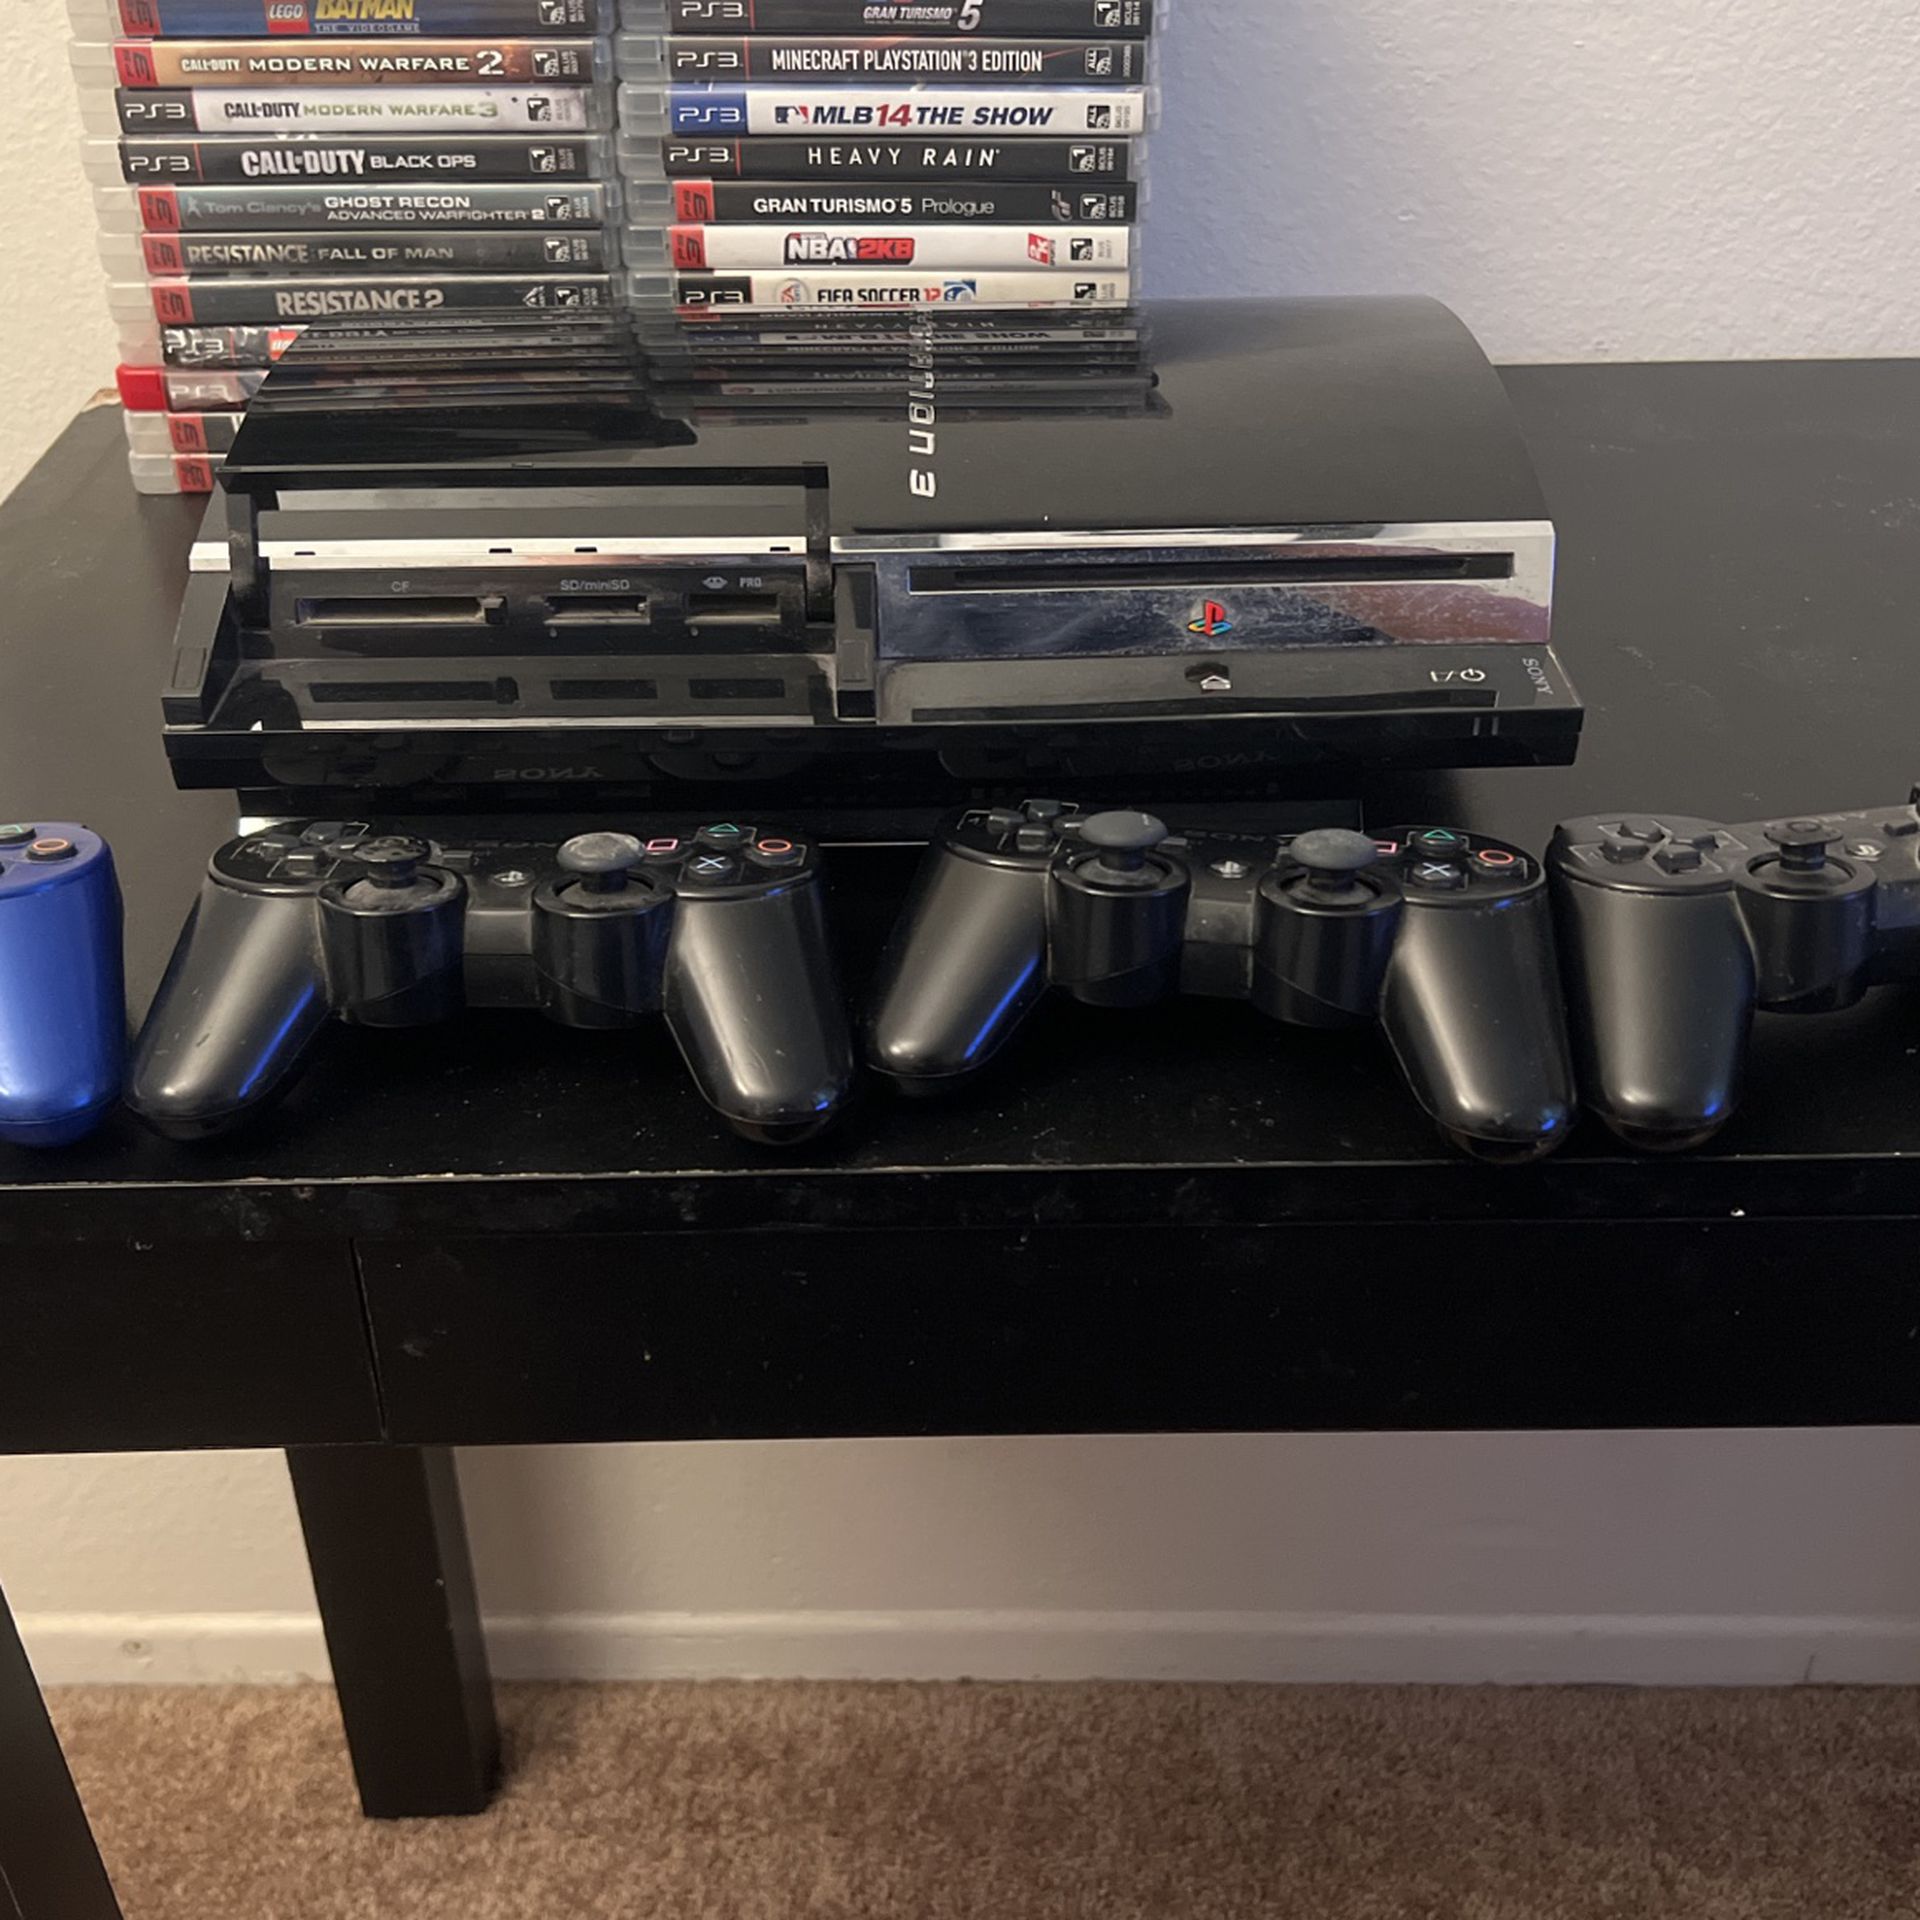 PlayStation 3 PS3 60GB CECHE01 *Backwards Compatible* With 5 Controllers And 35 Games Sale in La Habra Heights, CA - OfferUp